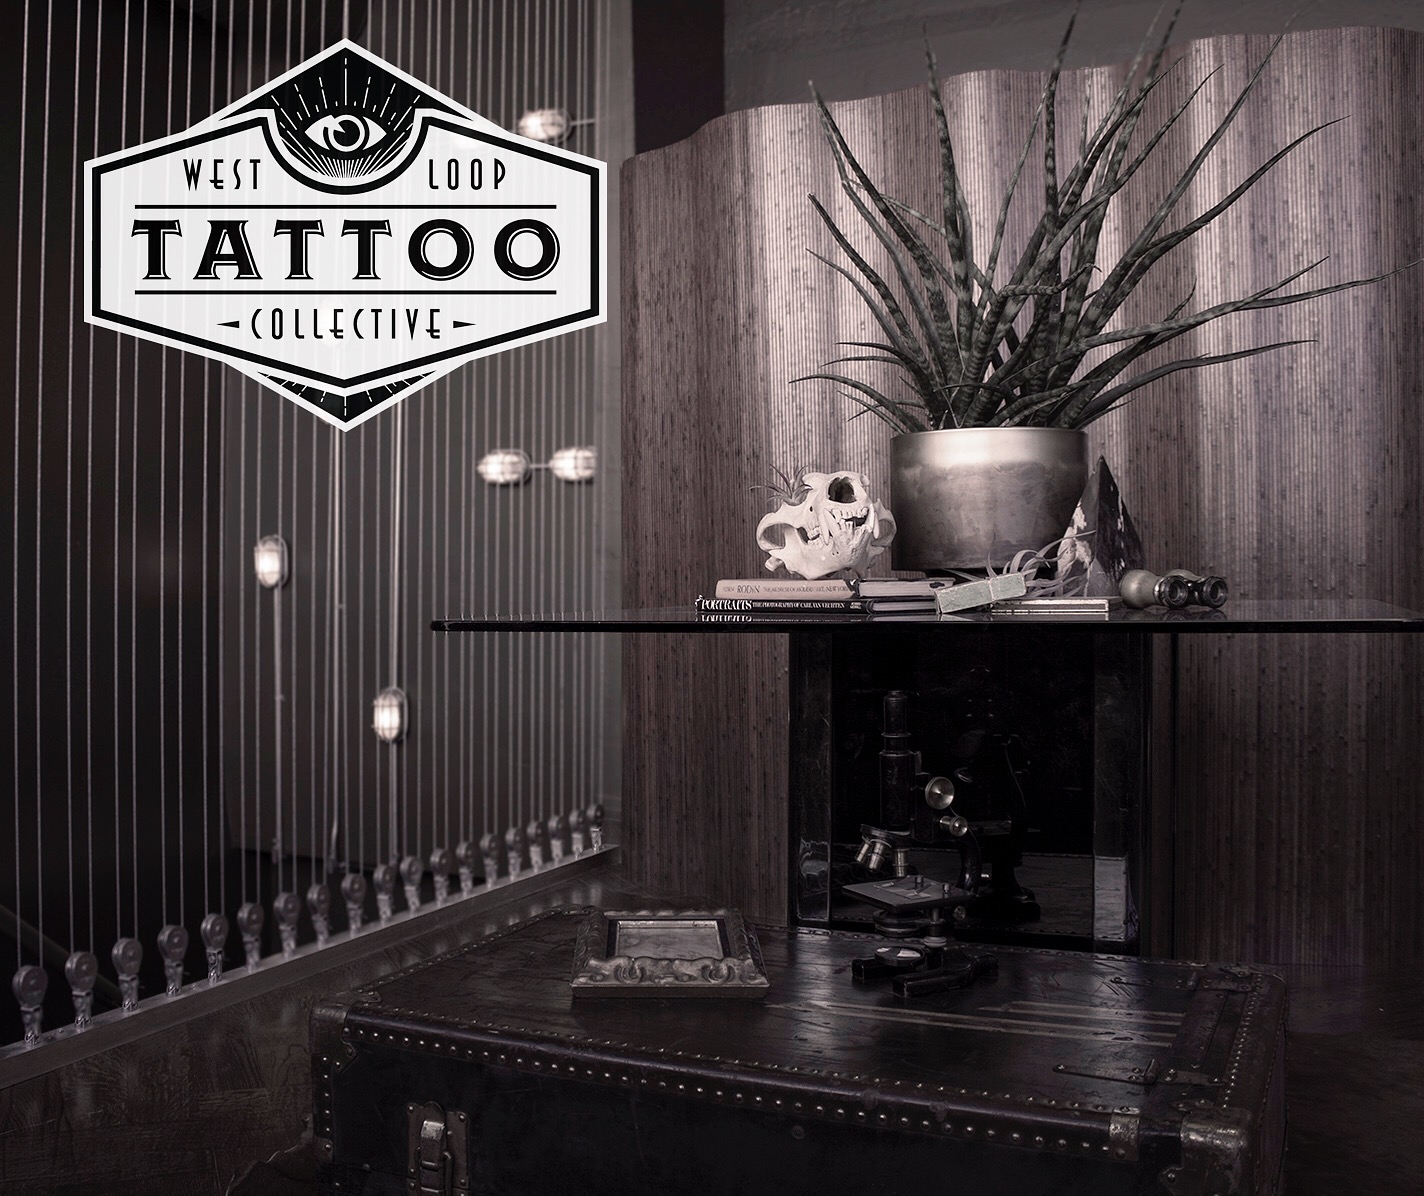 West Loop Tattoo Collective